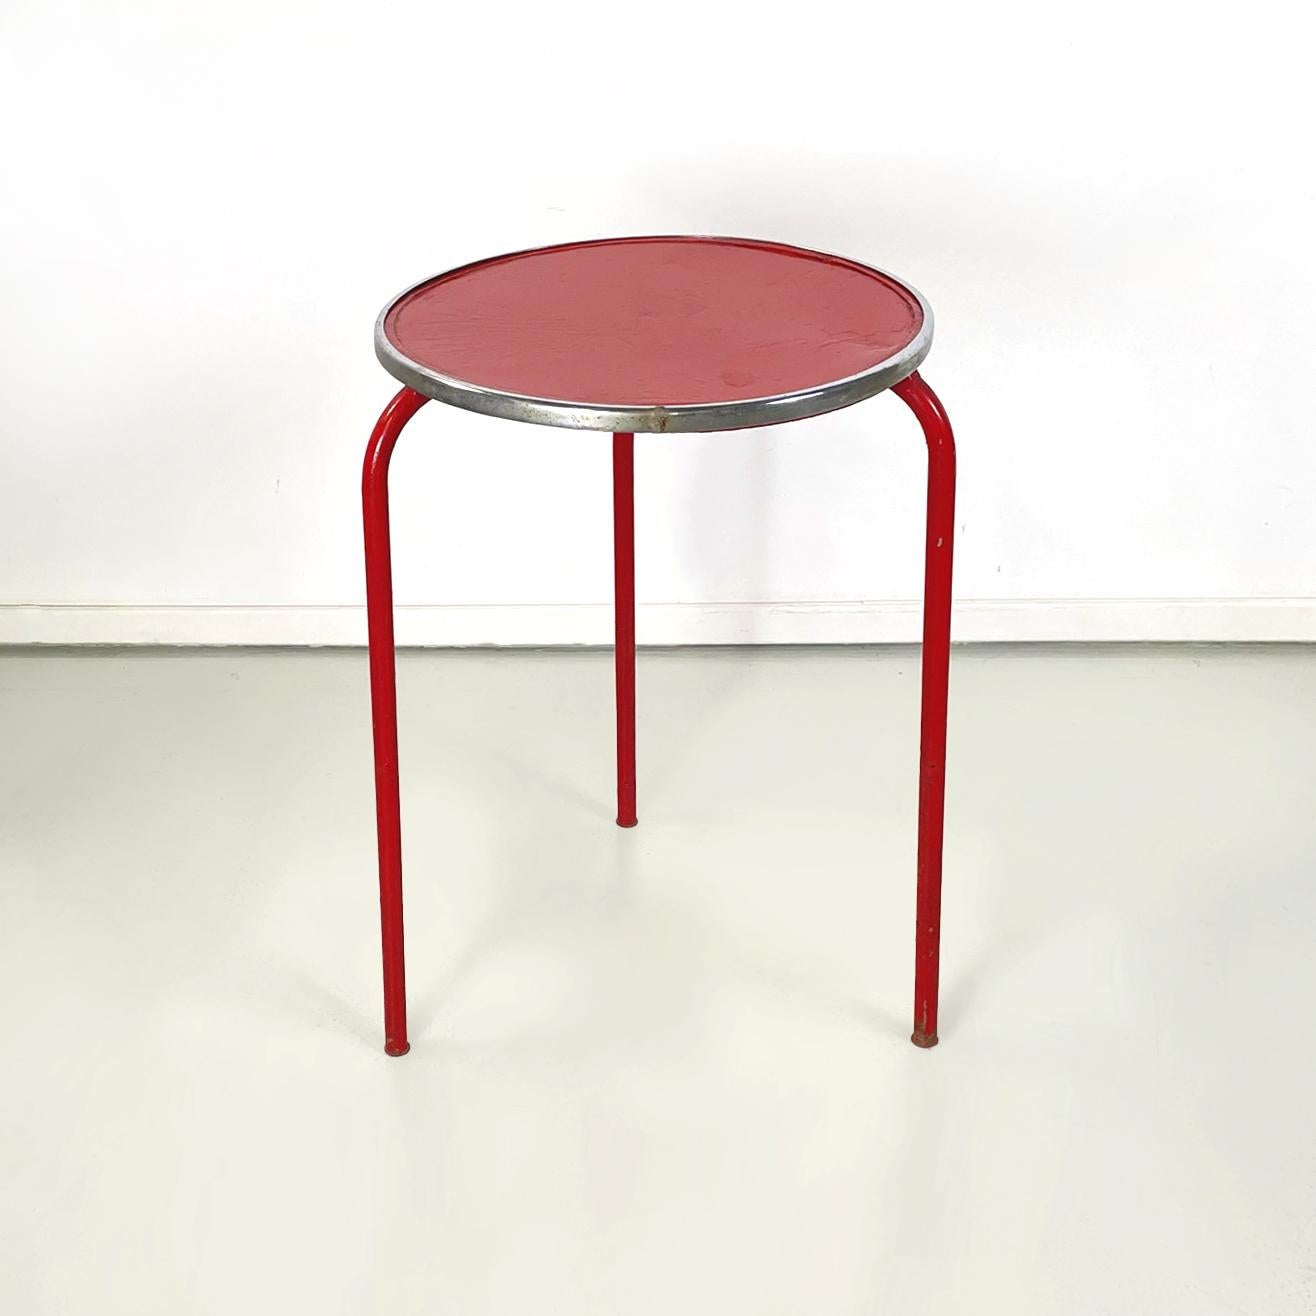 Italian modern round coffee table in red metal, 1980s
Coffee table with round red painted metal top and curved metal profile. The 3 legs are in red painted metal rod. The coffee table is suitable for outdoor use in the garden or on the